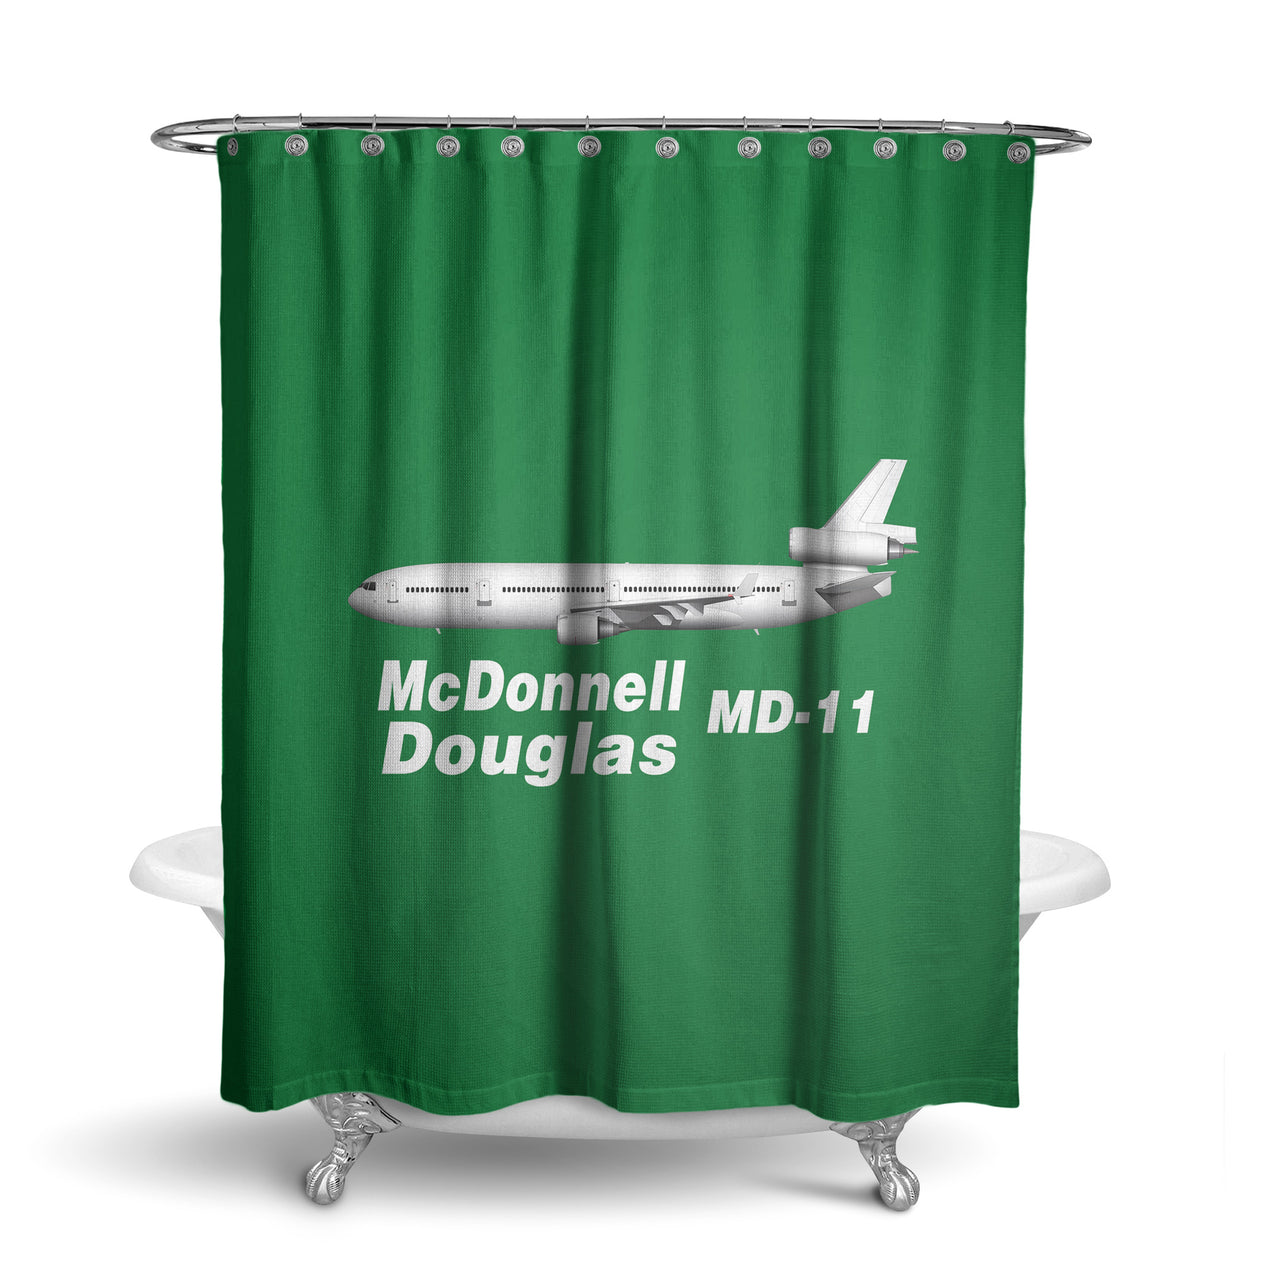 The McDonnell Douglas MD-11 Designed Shower Curtains